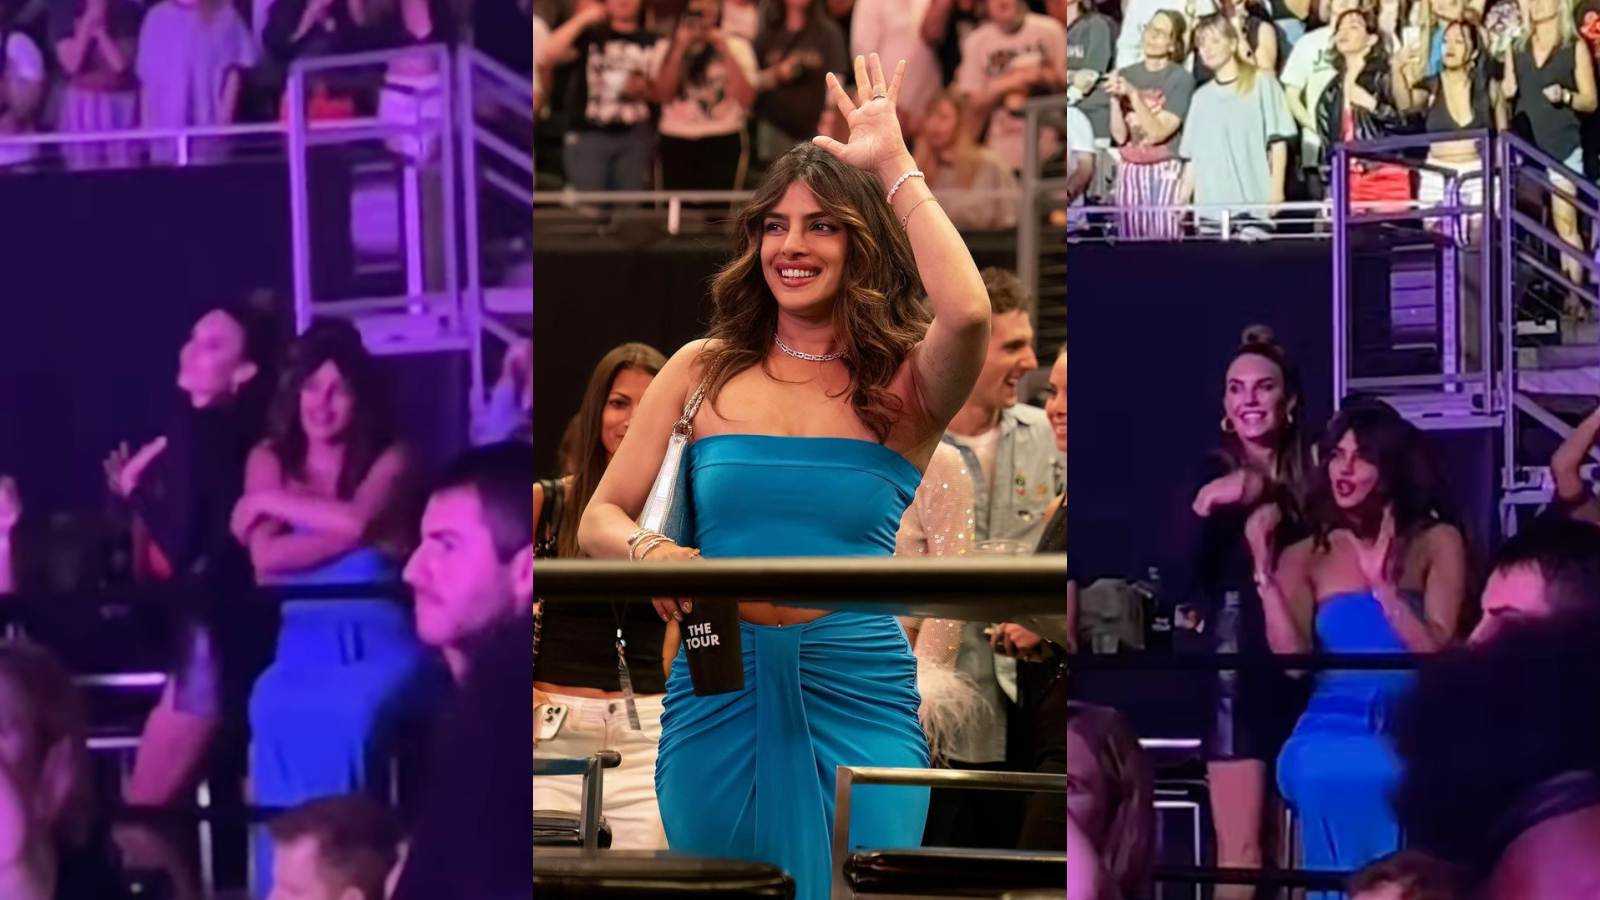 Priyanka Bf Picture Video - Priyanka Chopra looks gorgeous in blue as she dances with friend Elizabeth  Chambers at Nick Jonas' concert; fans call her 'best wife' | Bollywood News  - The Indian Express